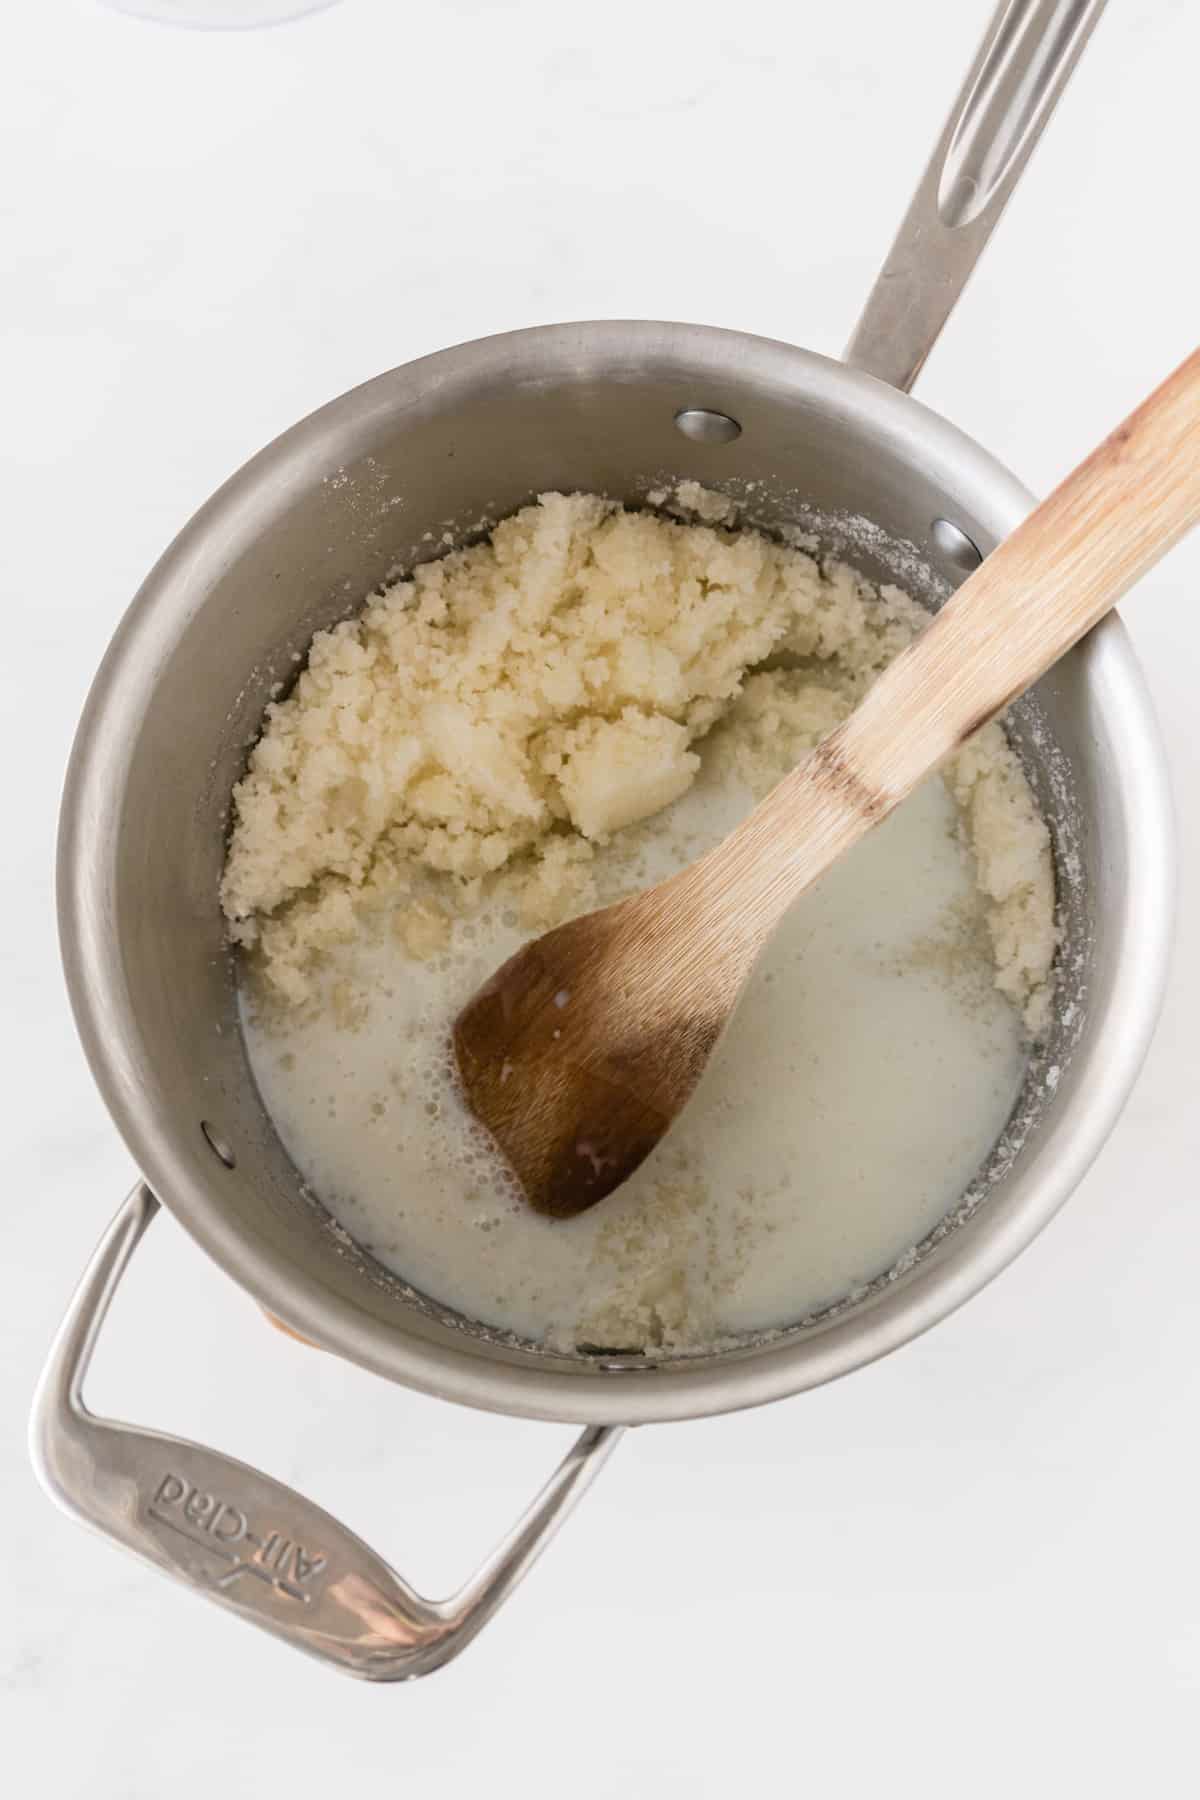 butter sugar mixture in saucepan with milk and wooden spoon